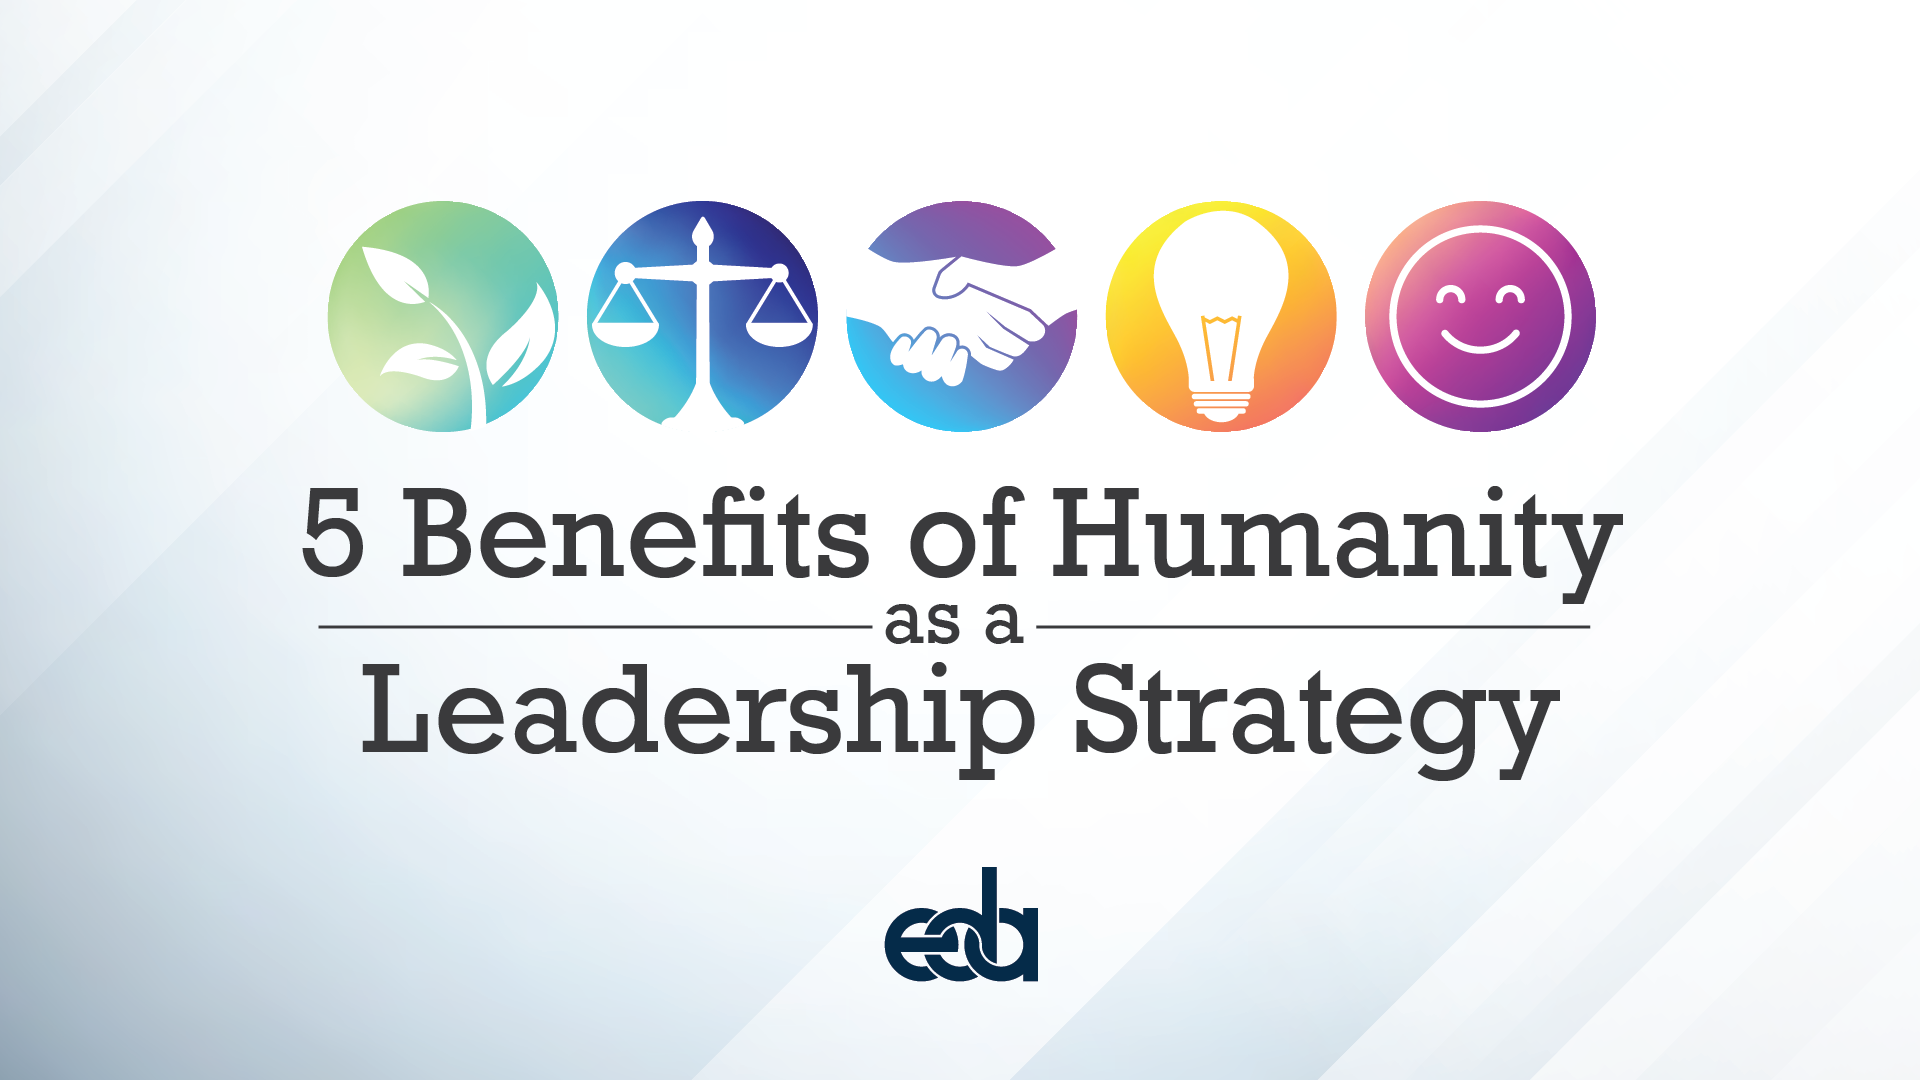 5 Benefits of Humanity as a Leadership Strategy